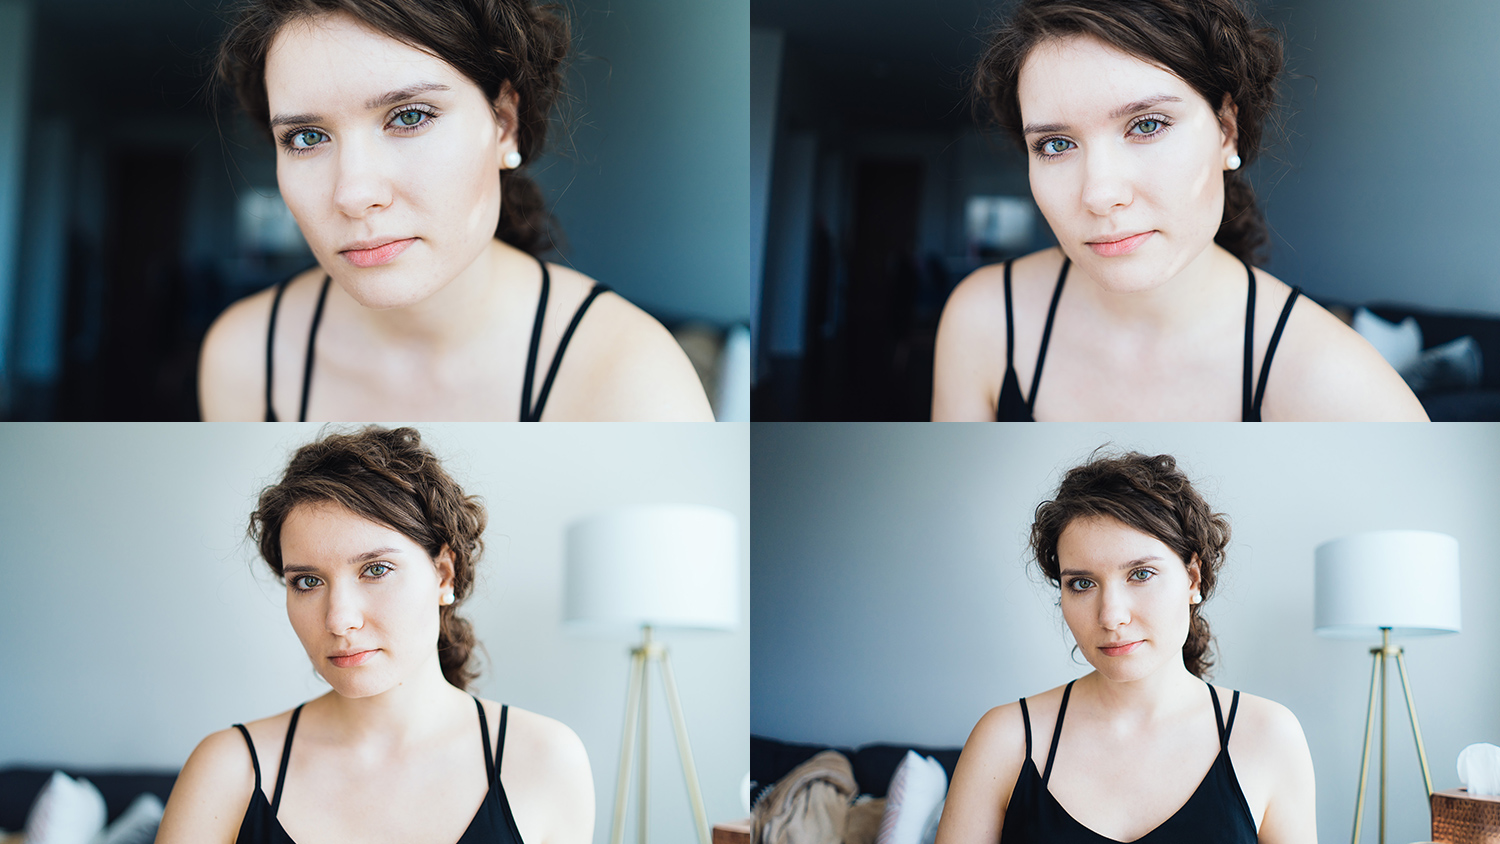 caban: Rokinon 35mm 1.4 vs Sony 28mm 2.0 | Lens Test and Comparison on Full Frame Sony A7